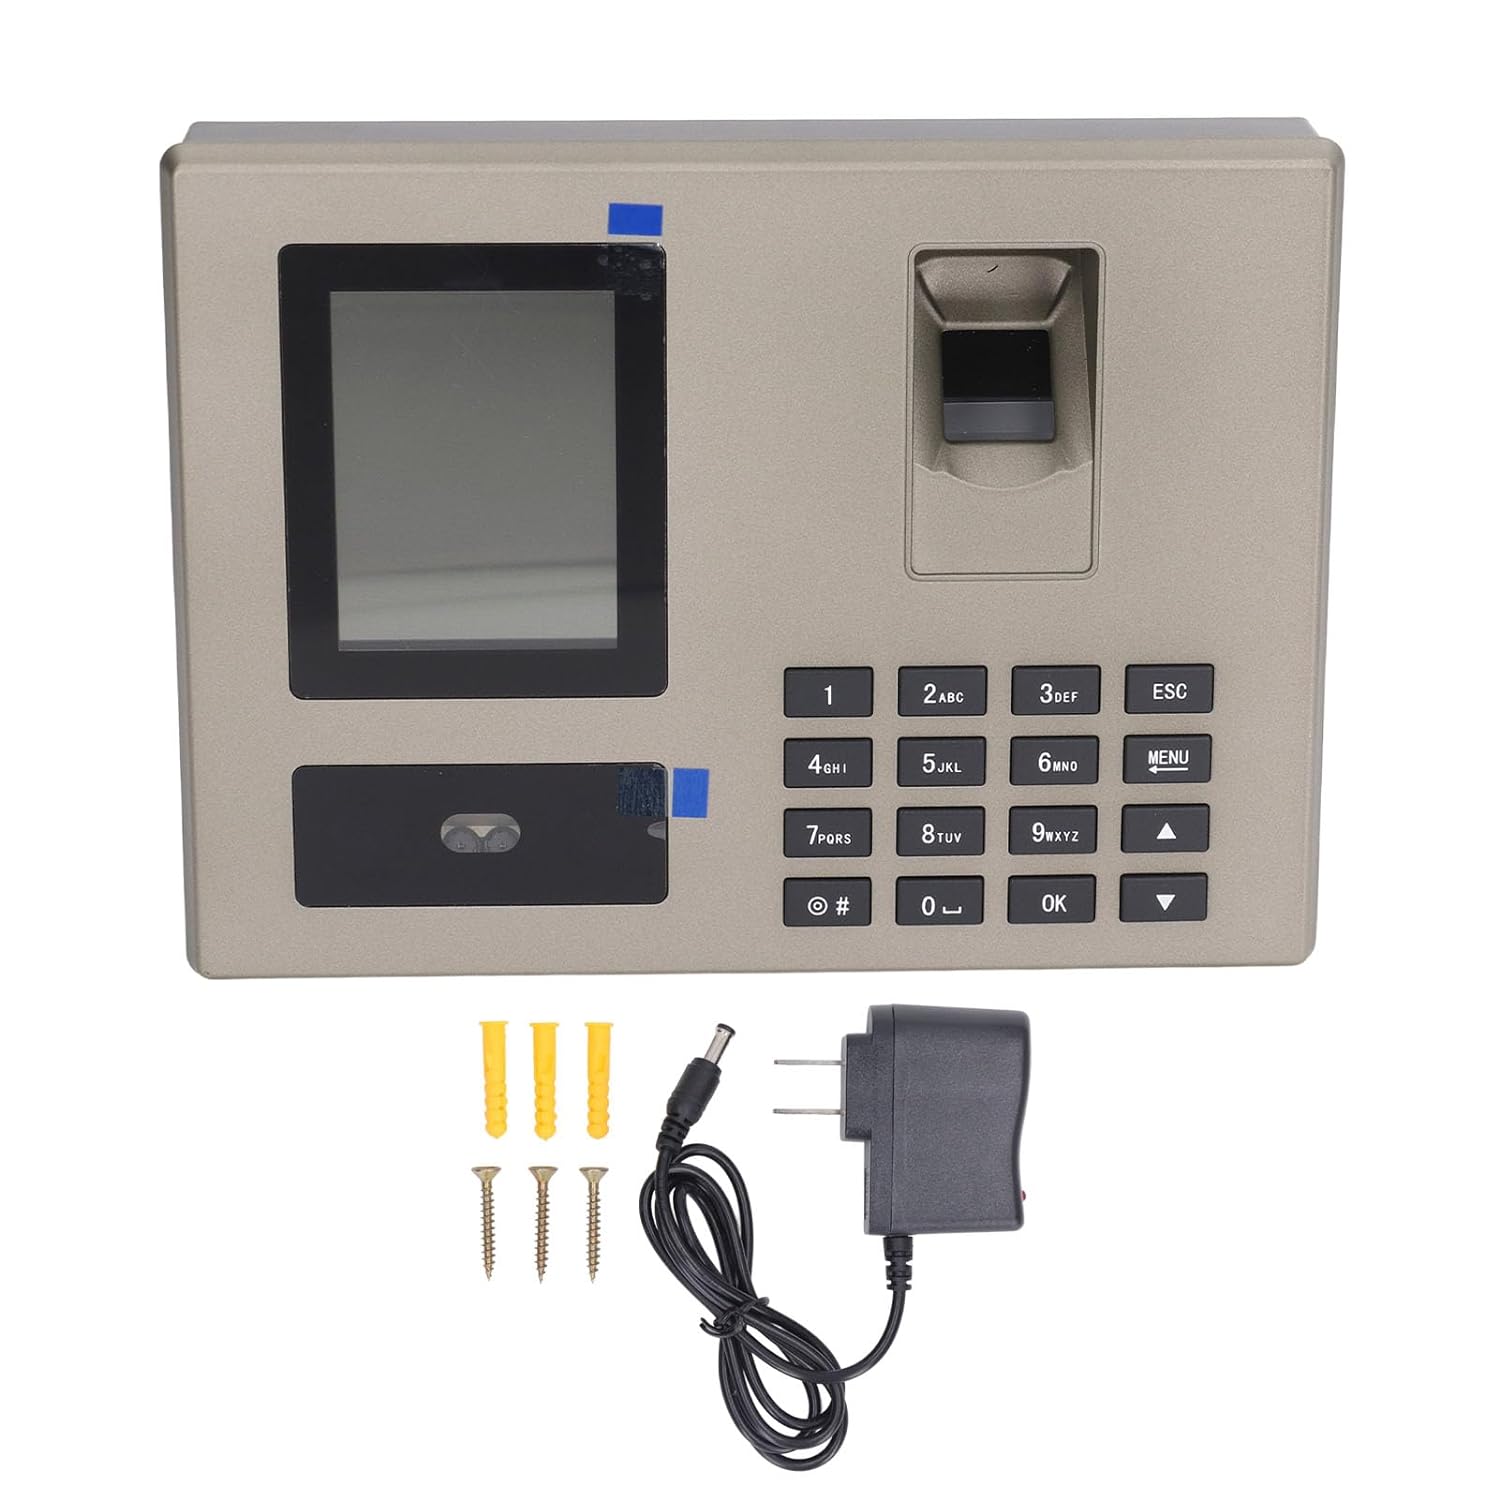 Biometric Fingerprint Attendance Machine with Face Recognition, 100-240V PIN Punch for Employee Time Control (US Plug)